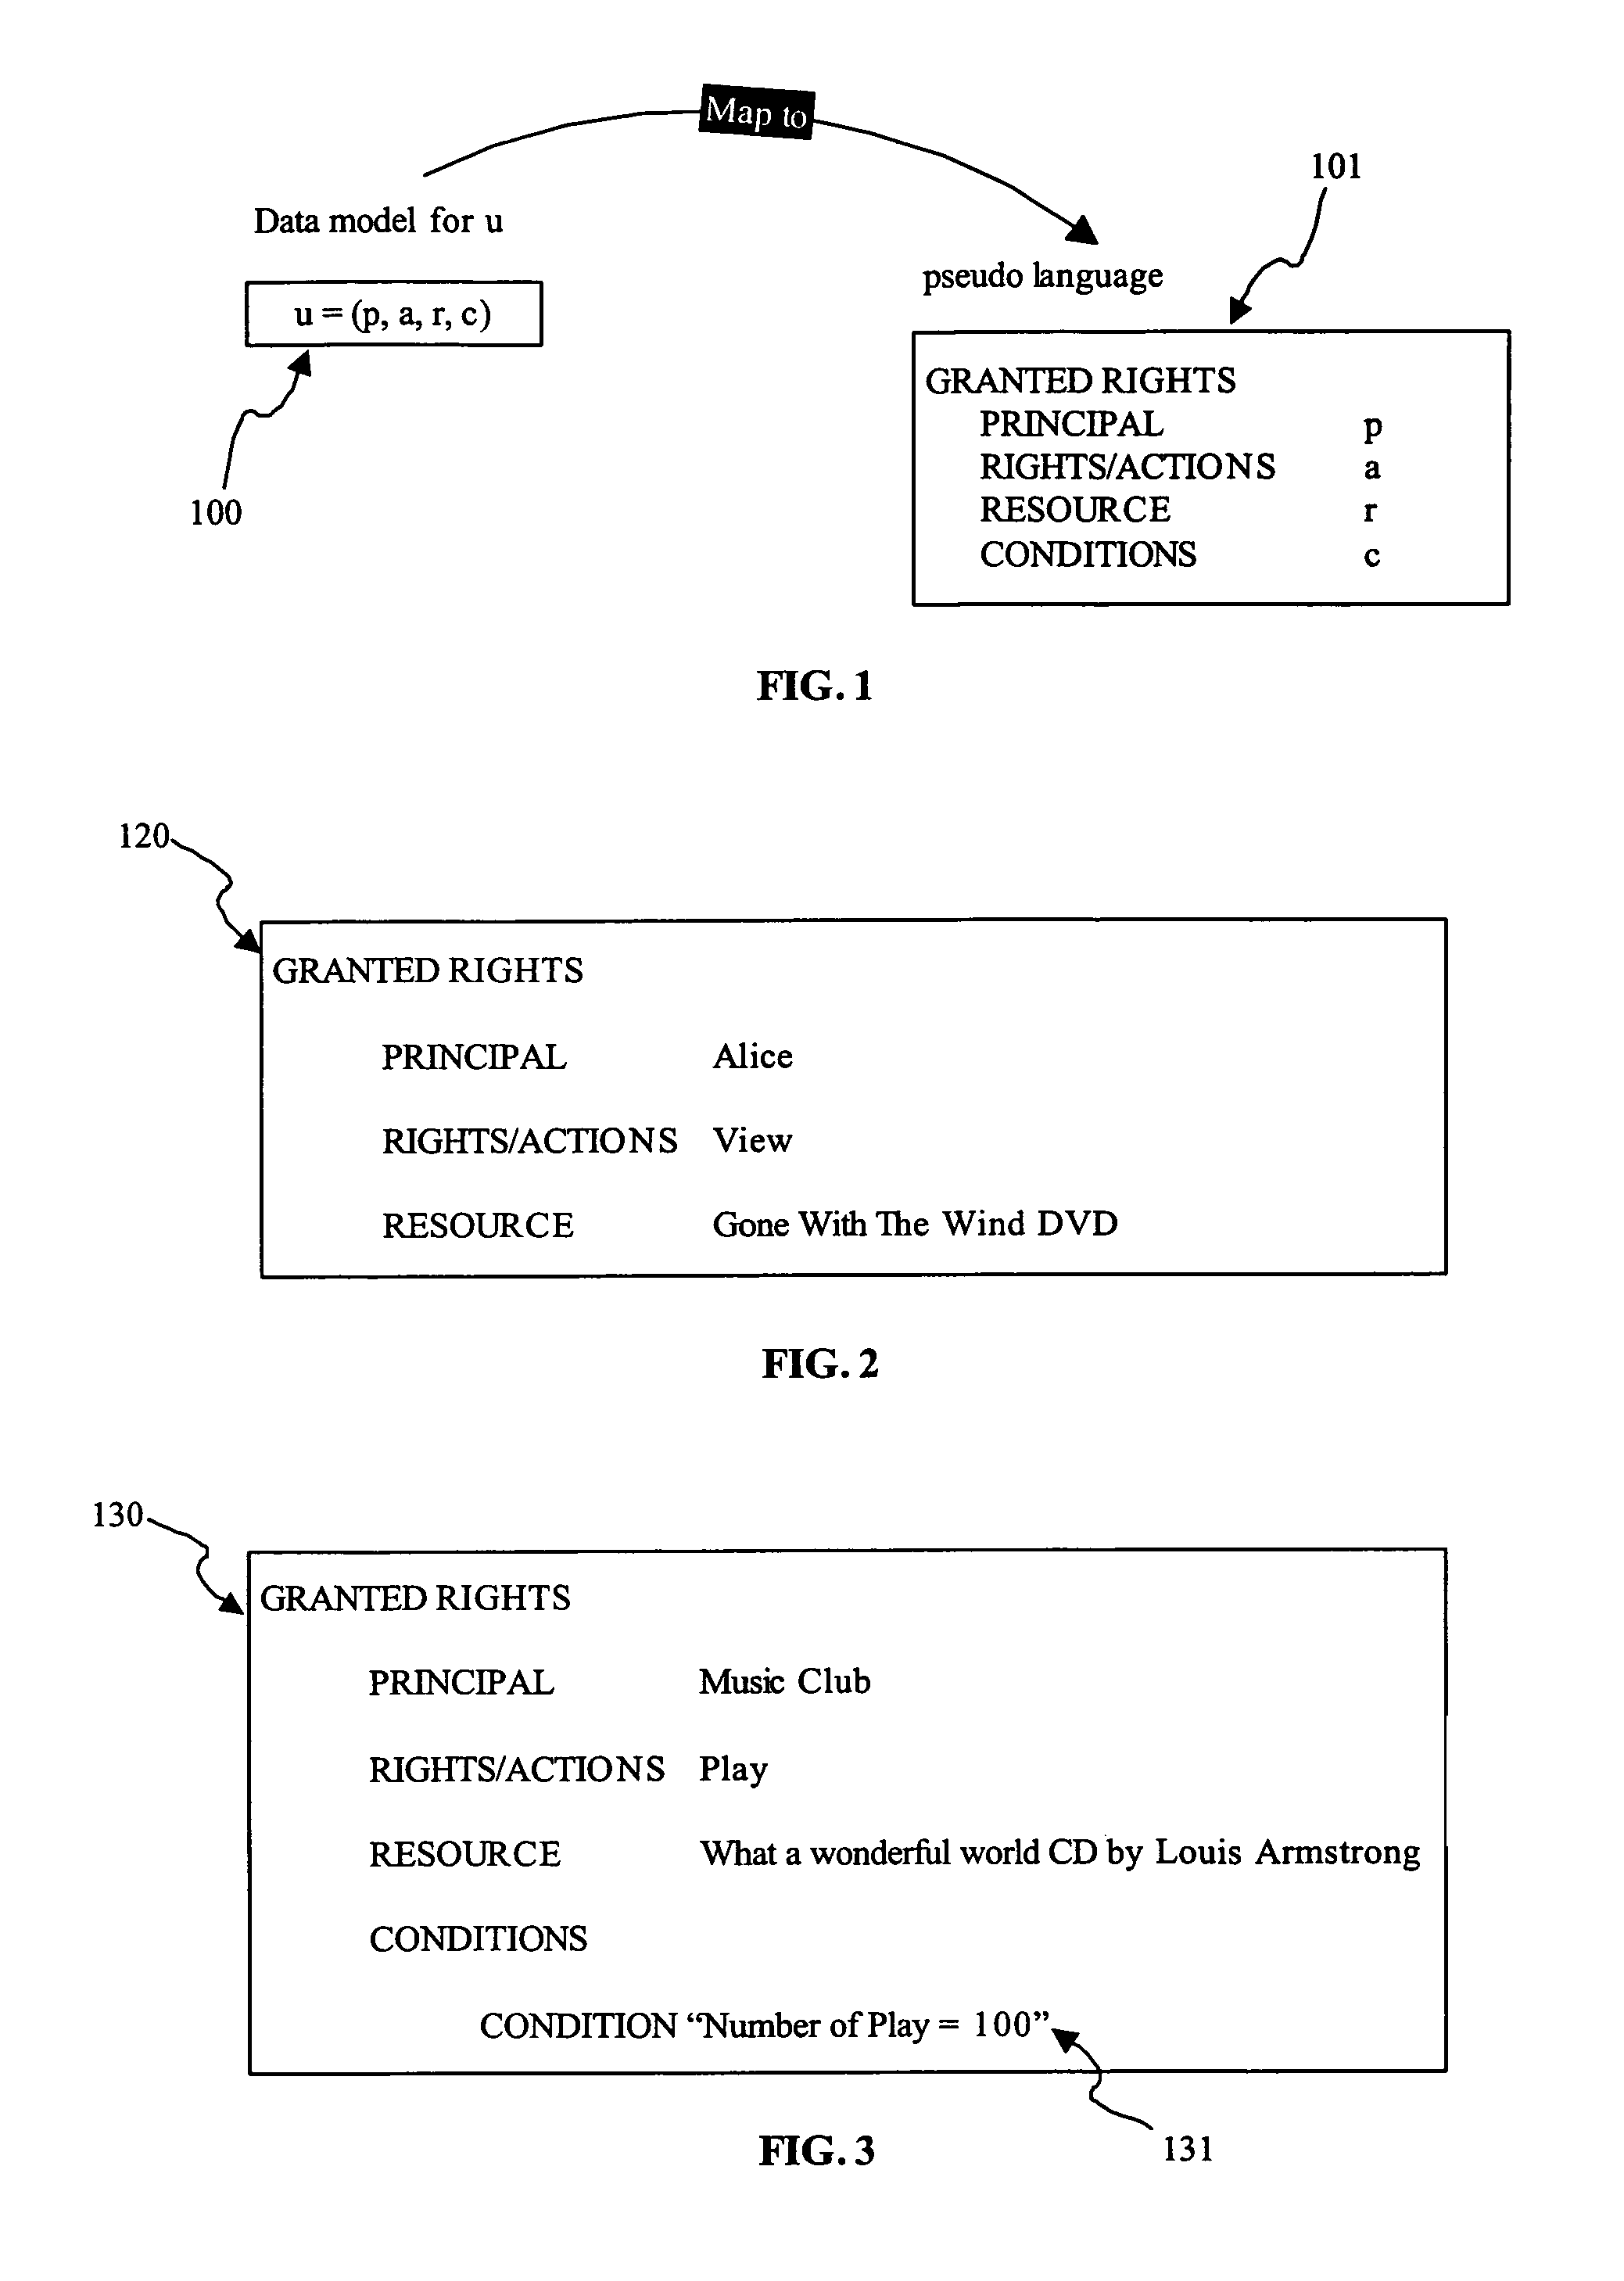 Method and system to support dynamic rights and resources sharing